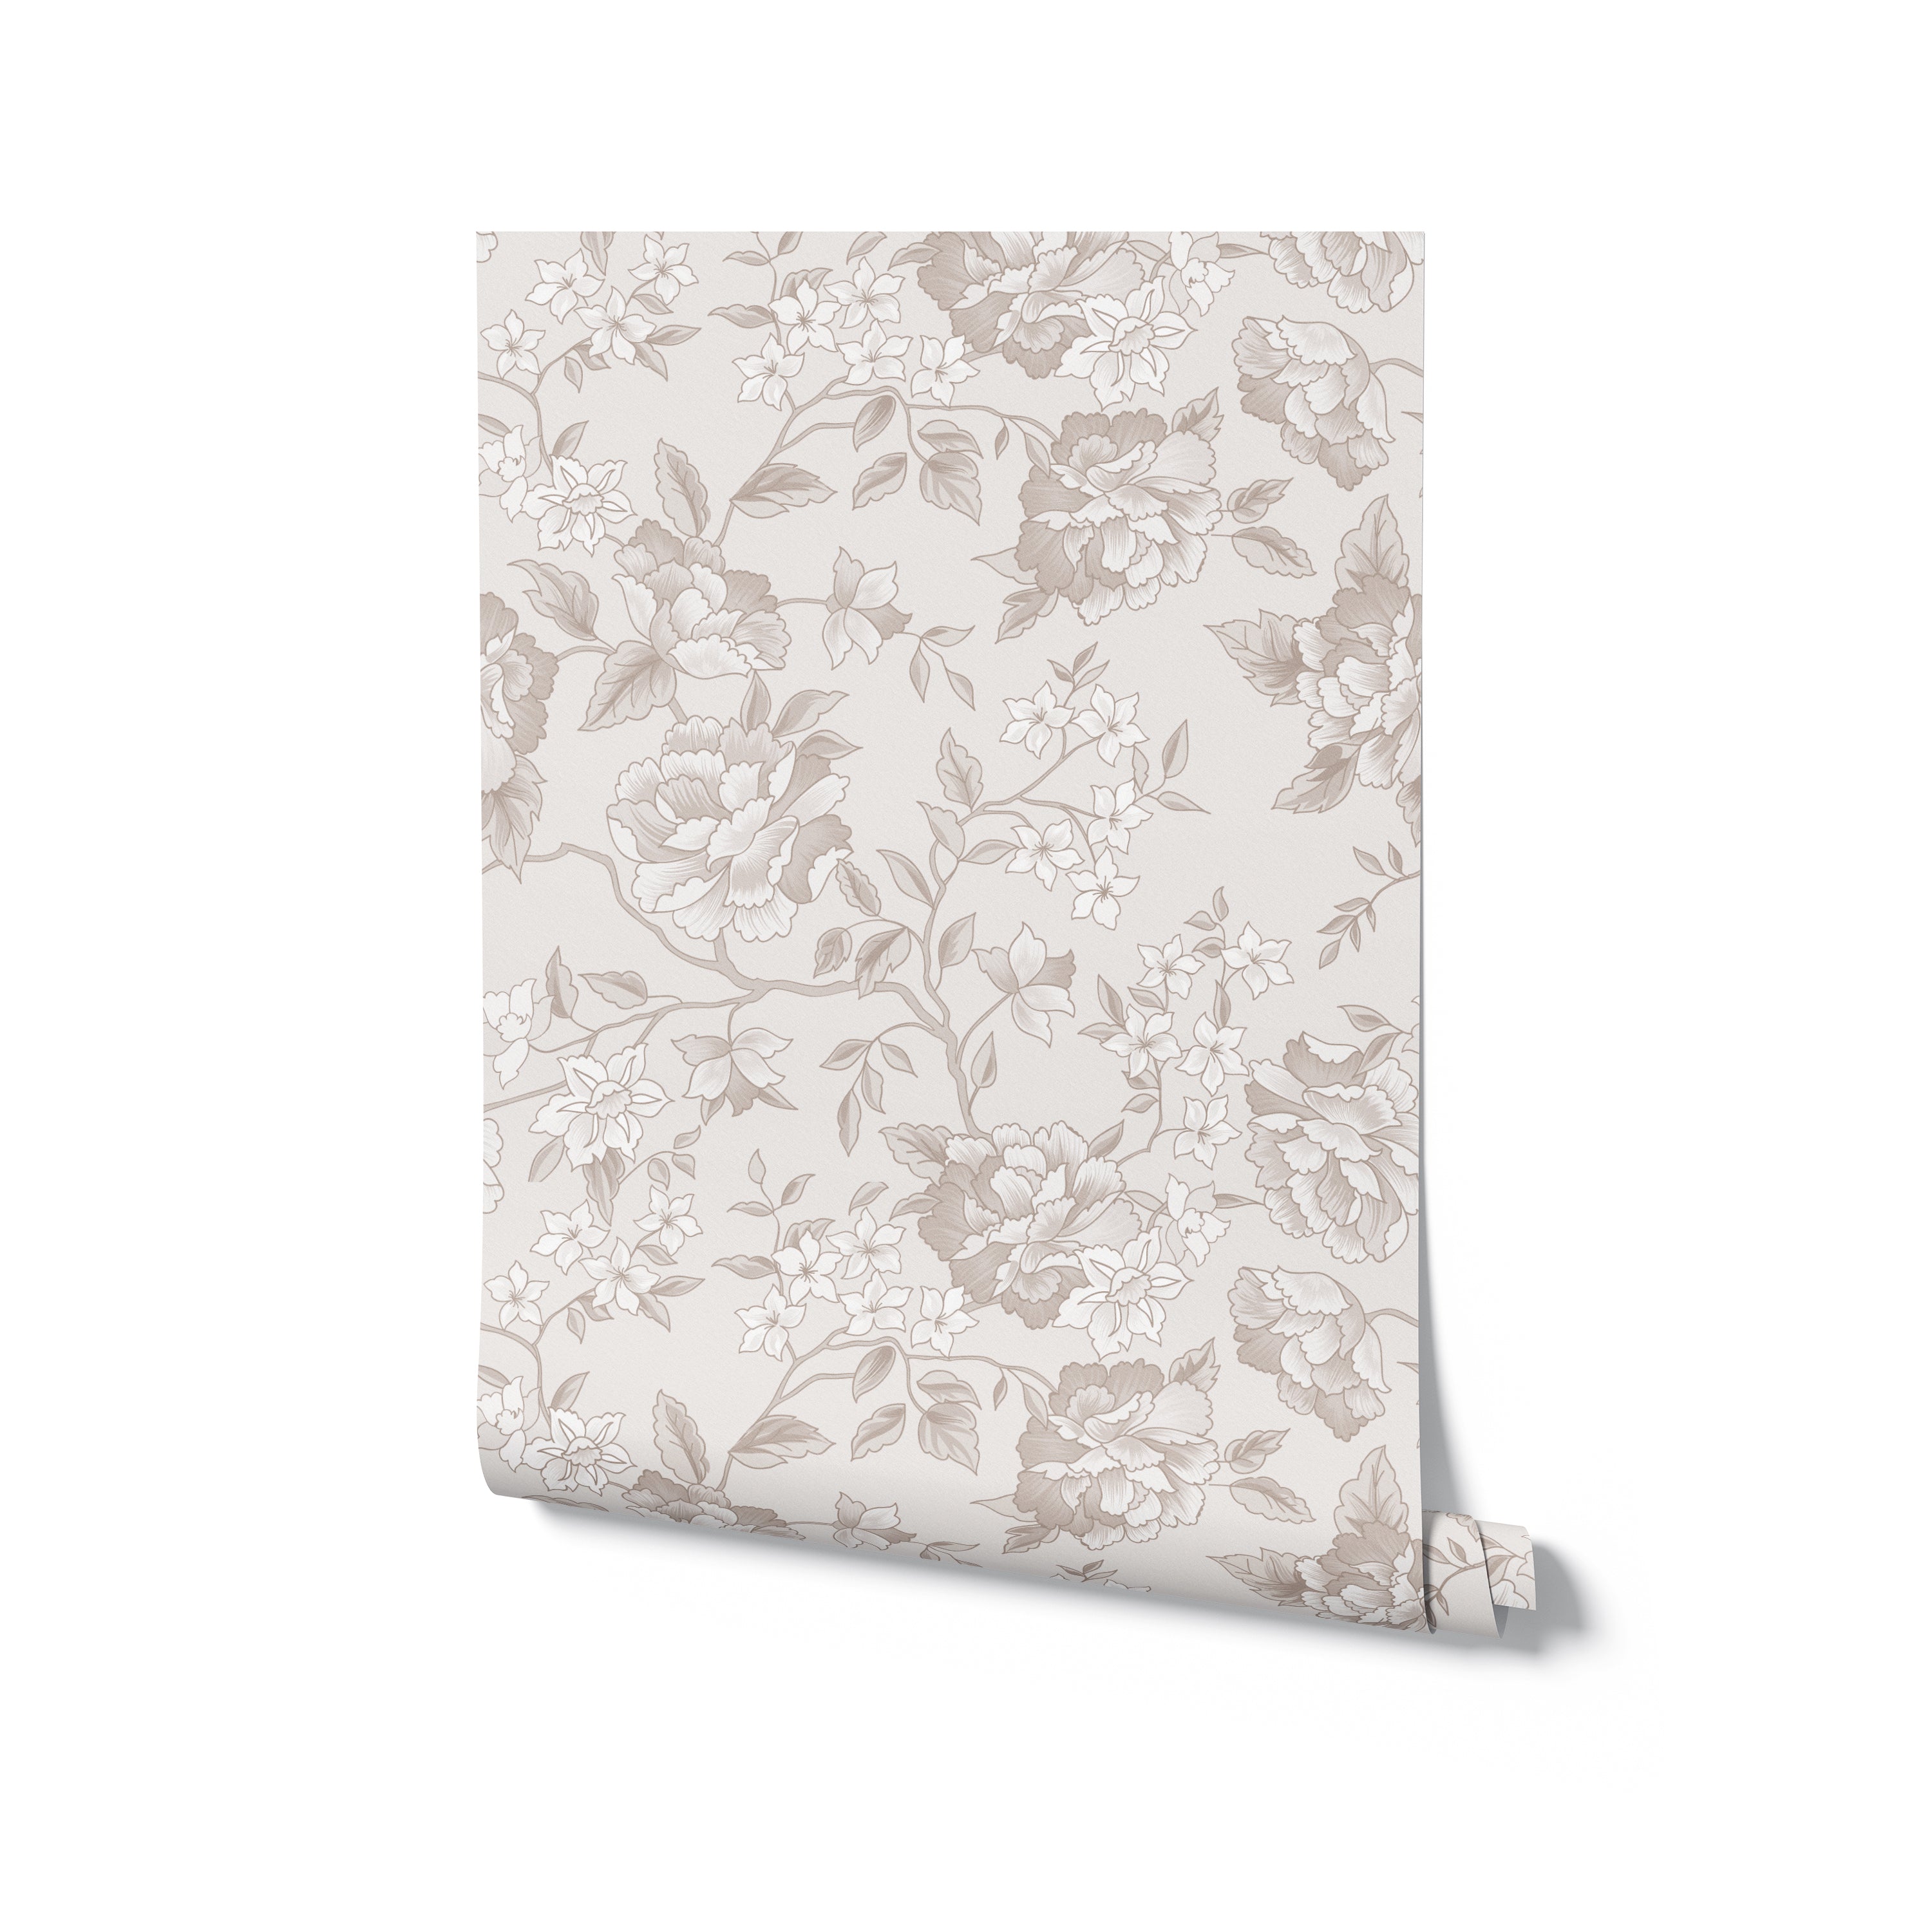 A rolled-out section of the Ornamental Garden Wallpaper, featuring a beige background adorned with a detailed pattern of ornate floral illustrations in various shades of taupe. The elegant blooms and foliage provide a classic and sophisticated design for wall covering.